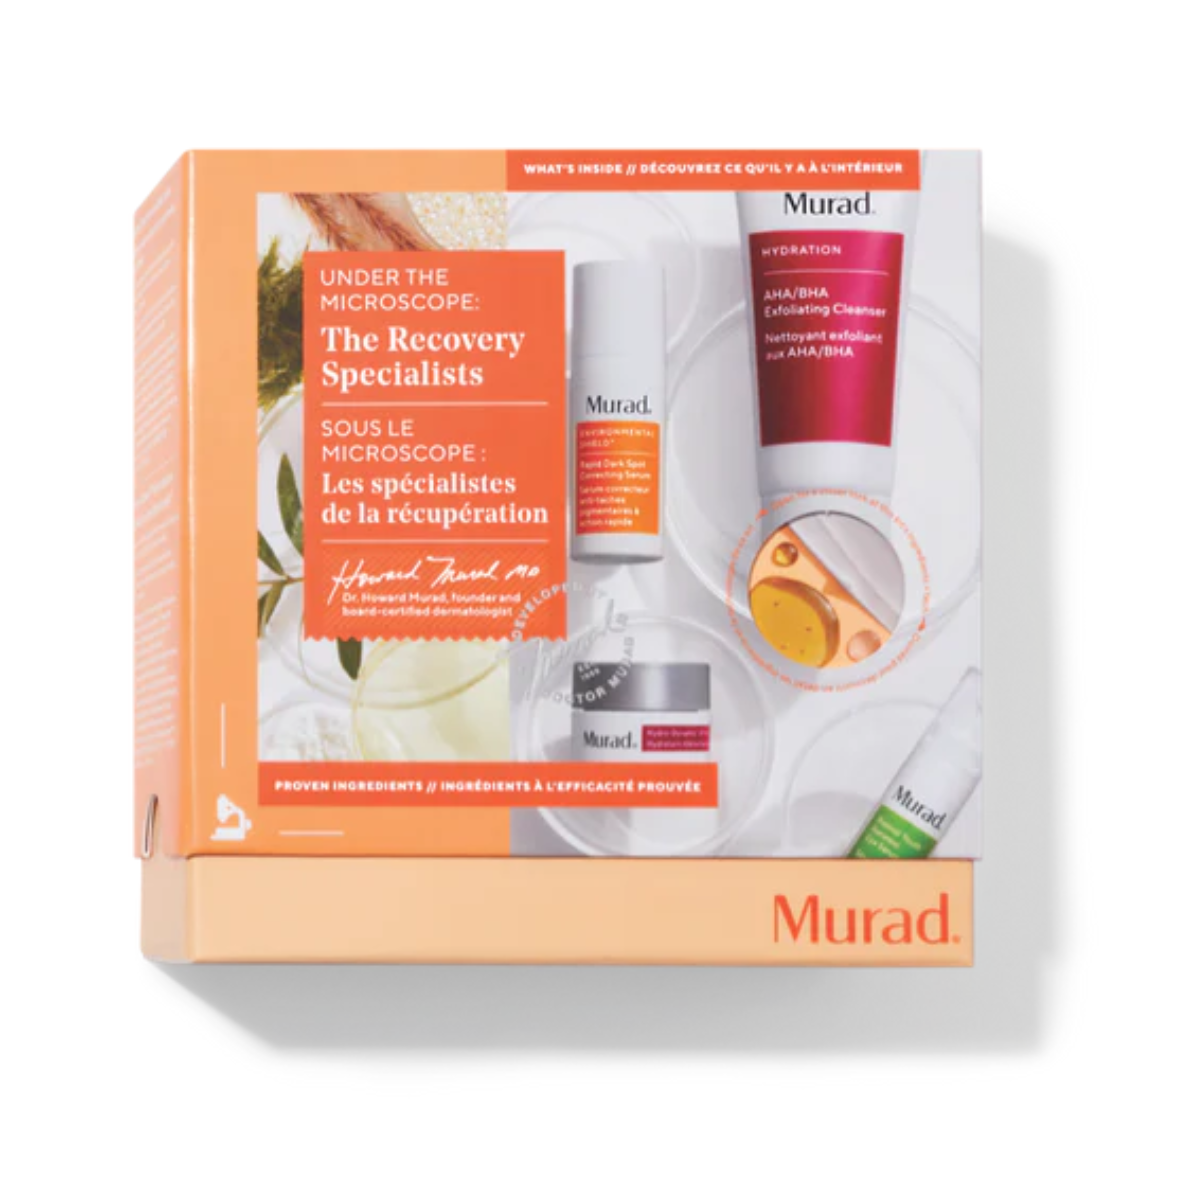 Murad Under the Microscope: The Recovery Specialists Gift Set.